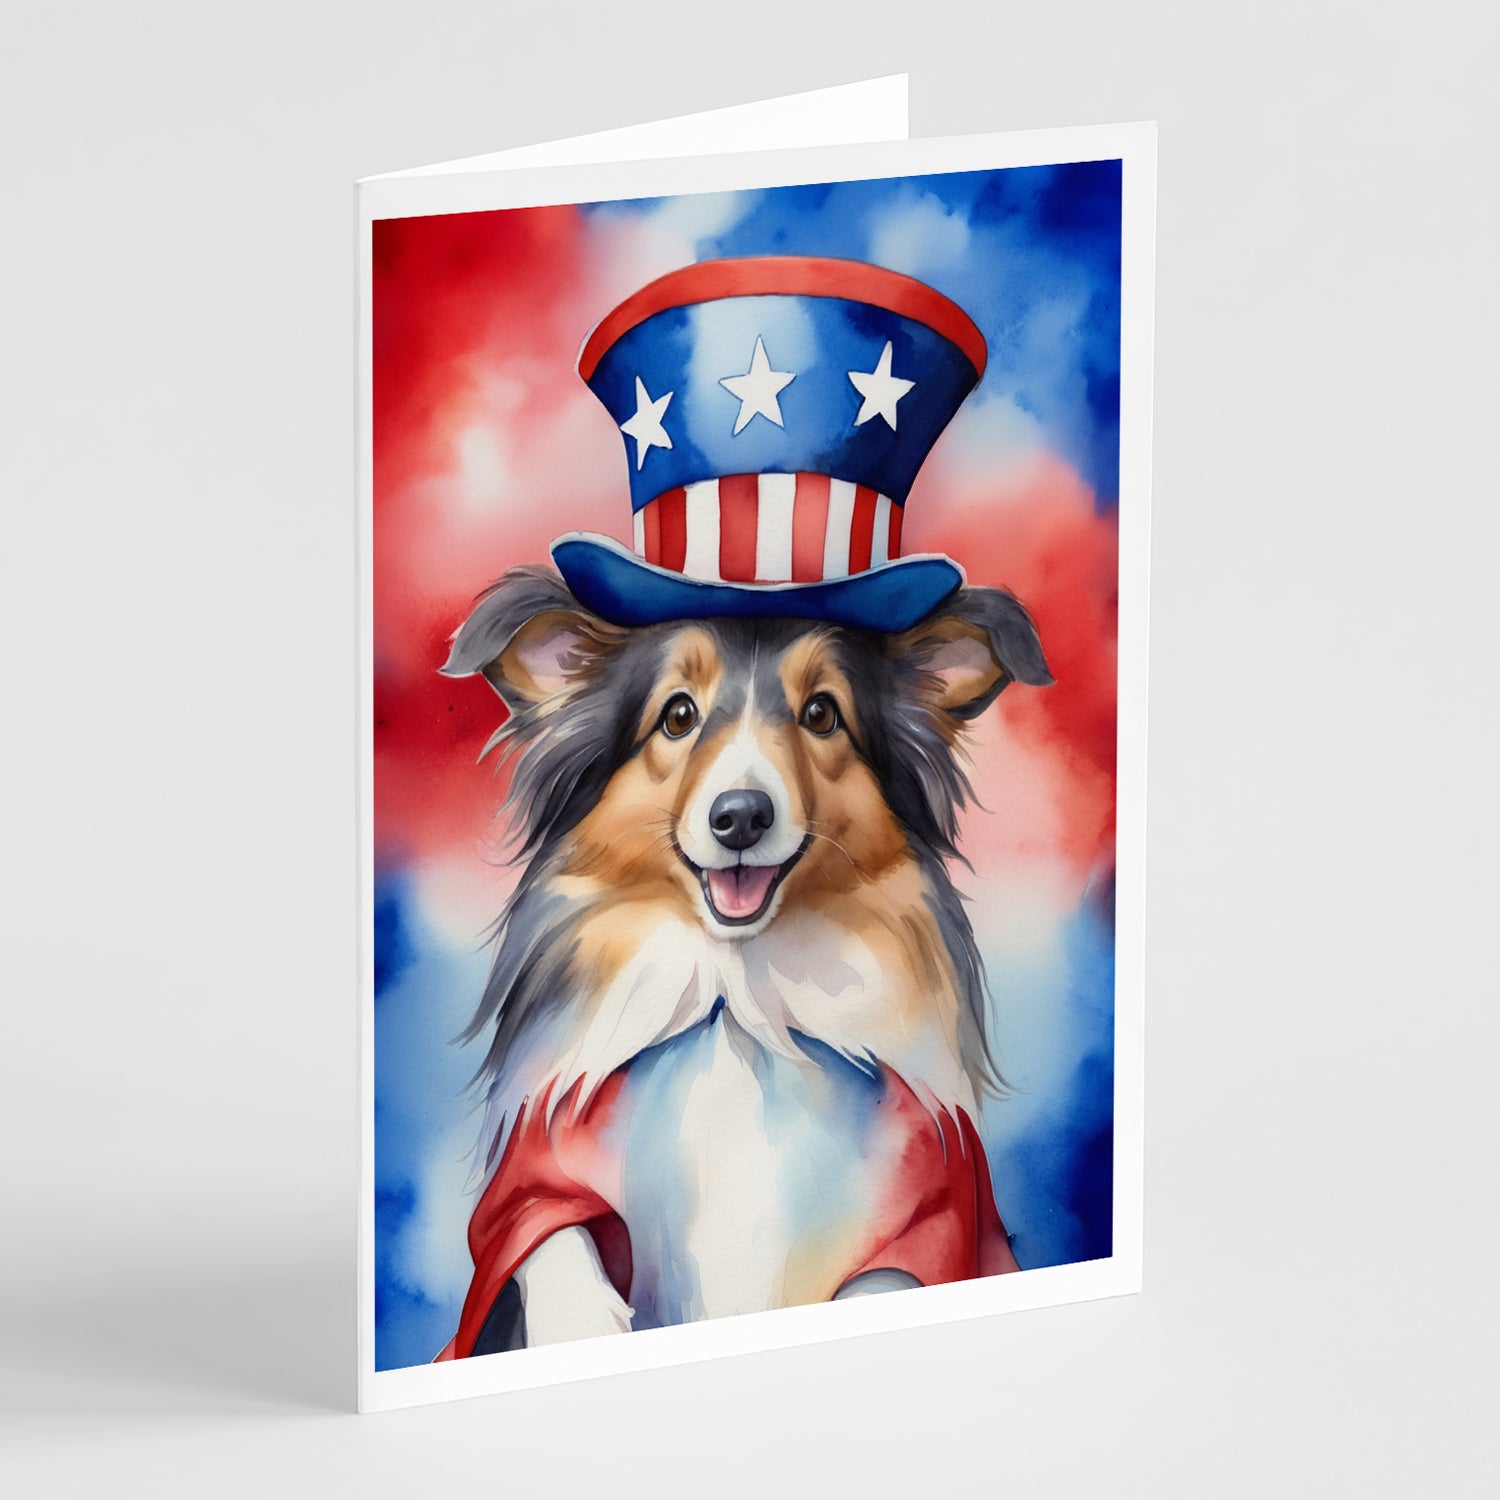 Buy this Sheltie Patriotic American Greeting Cards Pack of 8